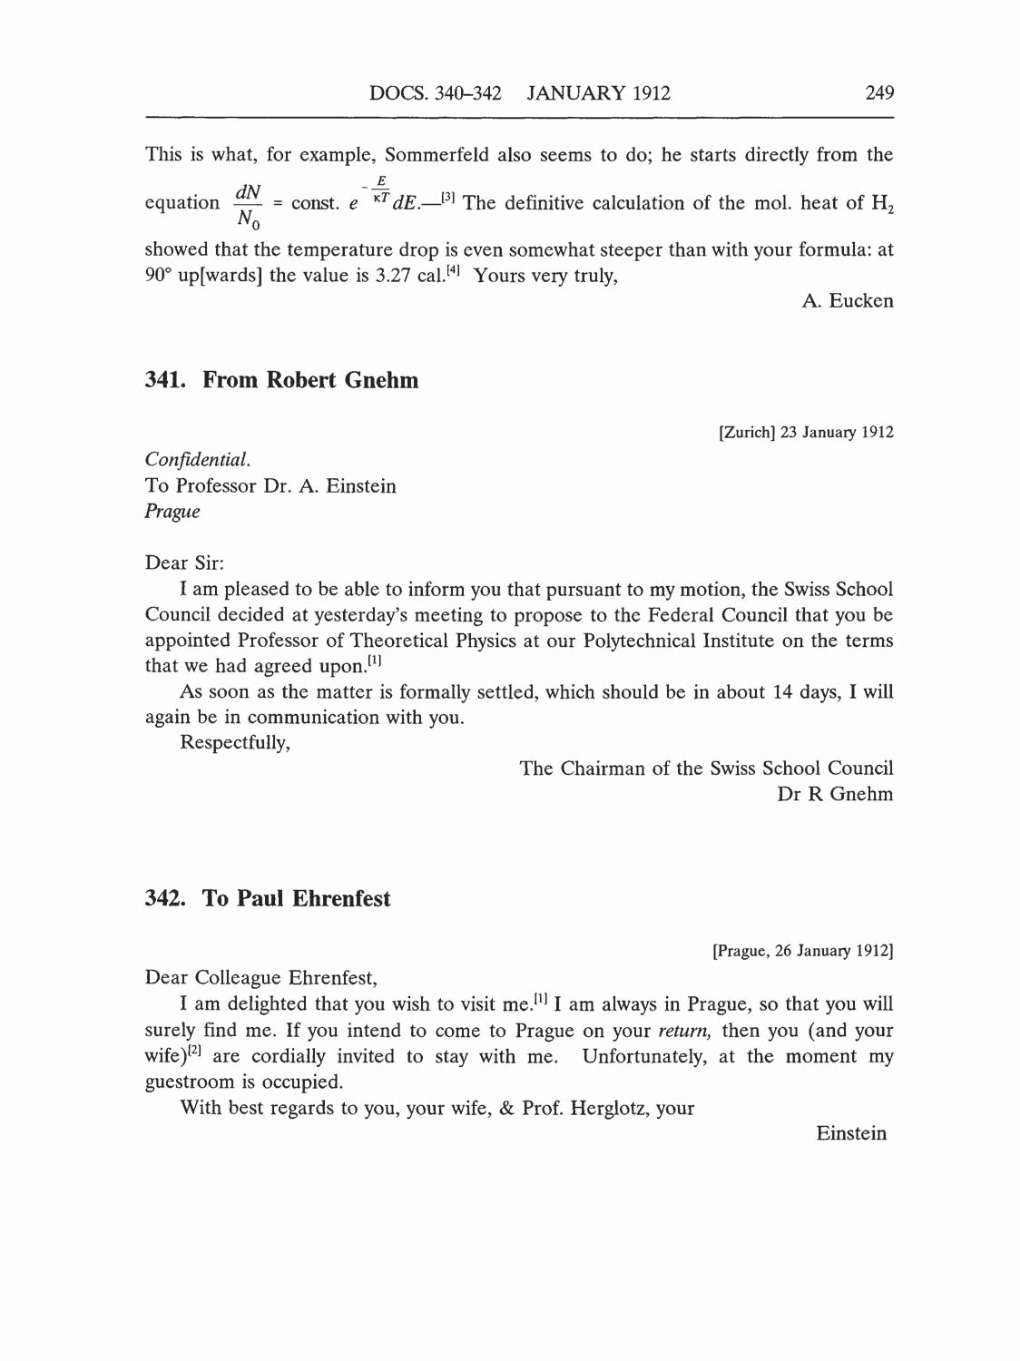 Volume 5: The Swiss Years: Correspondence, 1902-1914 (English translation supplement) page 249